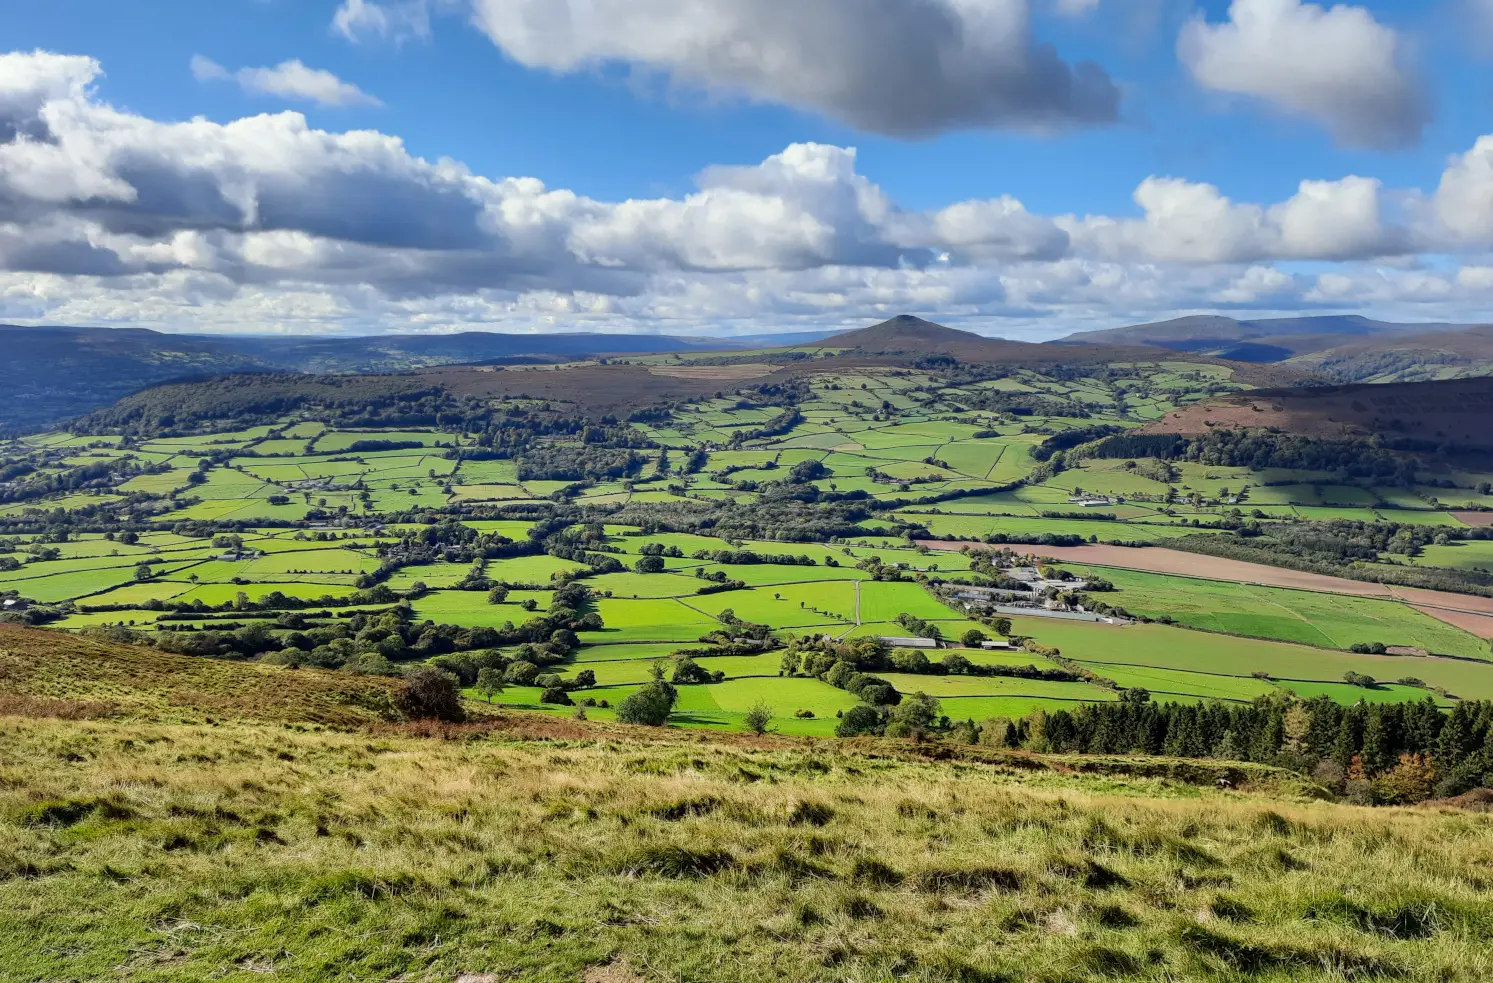 Views of Sugar Loaf and the Brecon Beacon mountains from the Skirrid Mountain